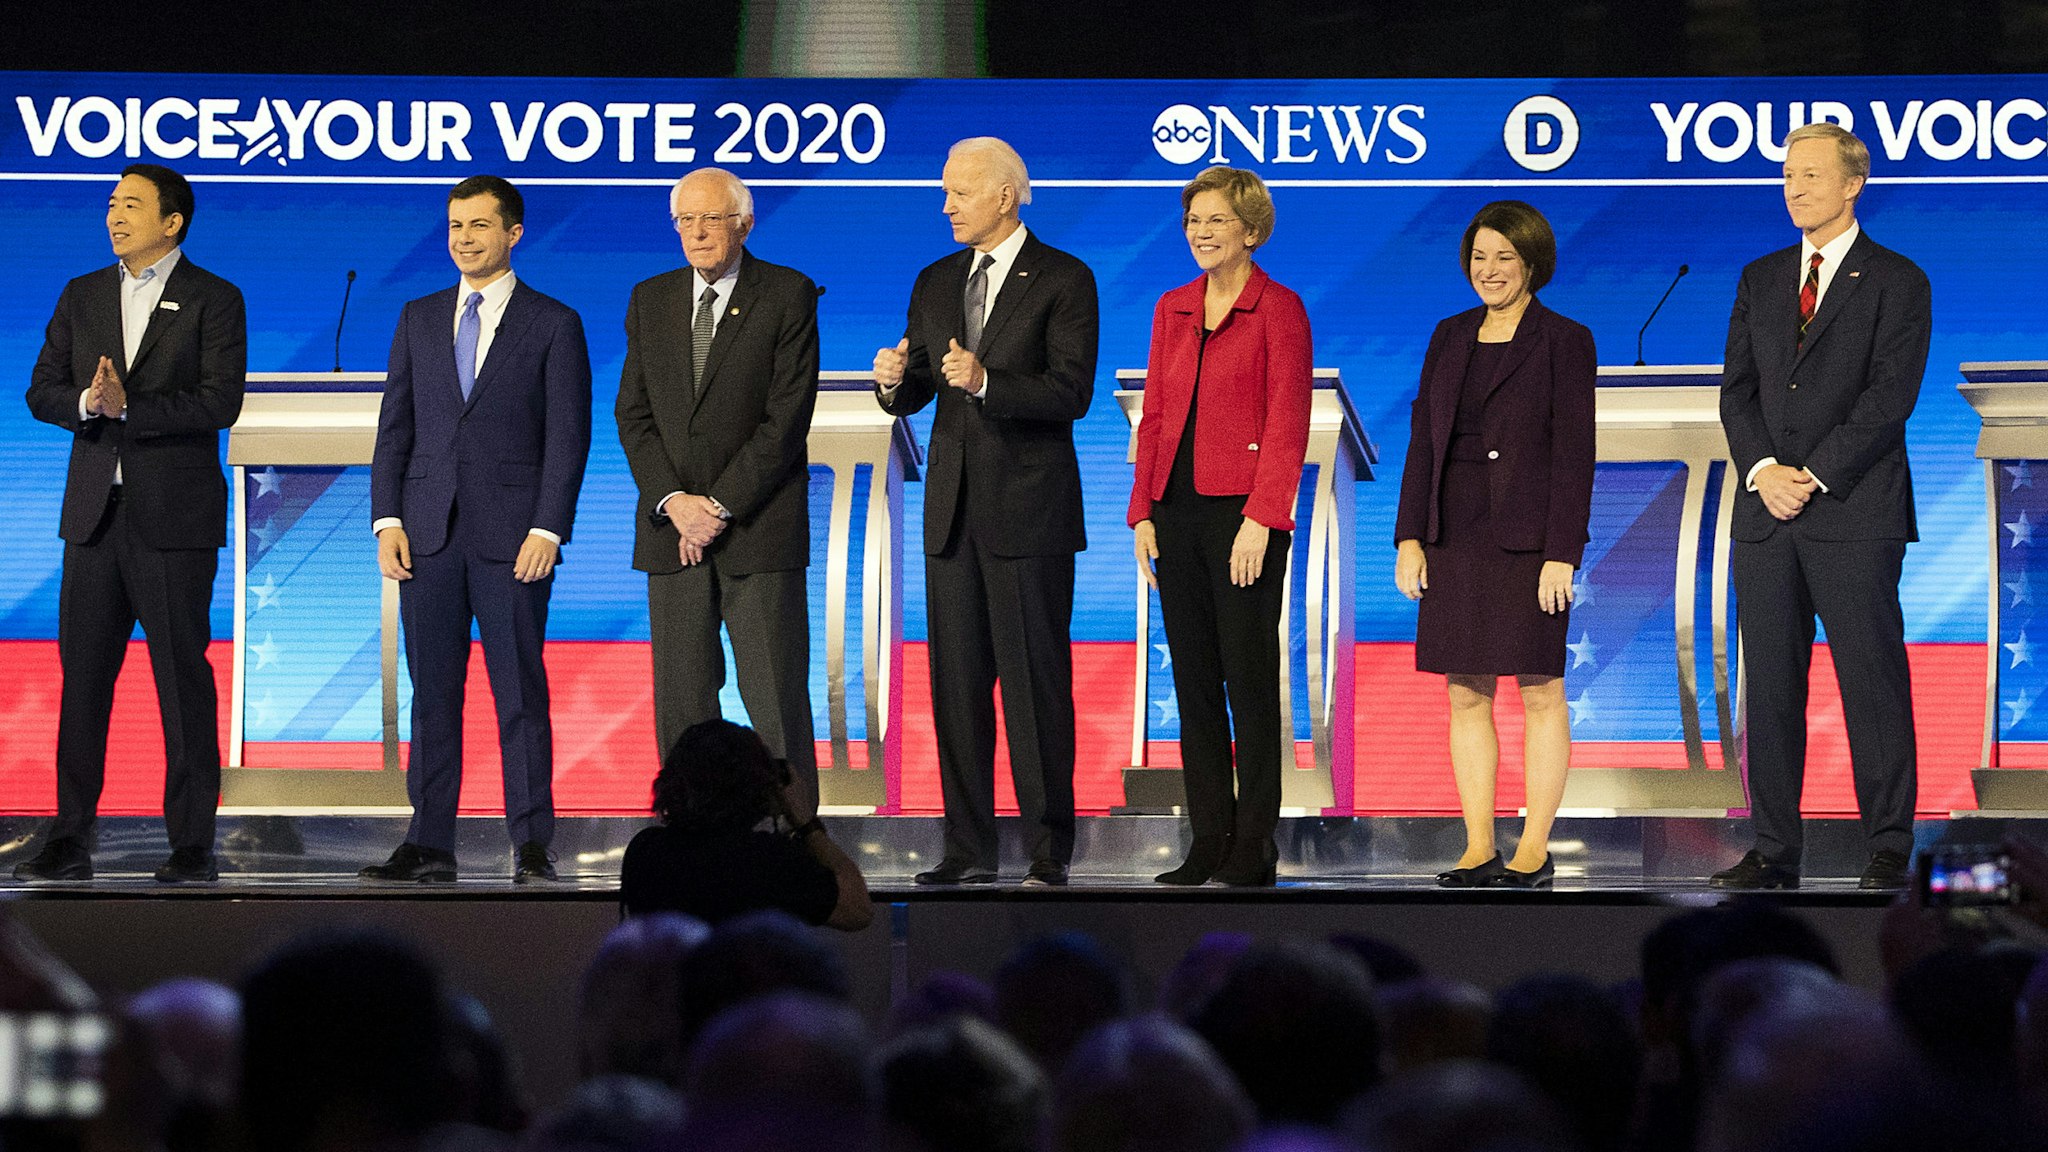 2020 Democratic presidential candidates, from left, Andrew Yang, founder of Venture for America, Pete Buttigieg, former mayor of South Bend, Senator Bernie Sanders, an Independent from Vermont, Former Vice President Joe Biden, Senator Elizabeth Warren, a Democrat from Massachusetts, Senator Amy Klobuchar, a Democrat from Minnesota, and Tom Steyer, co-founder of NextGen Climate Action Committee, arrive on stage during the Democratic presidential debate at Saint Anselm College in Manchester, New Hampshire, U.S., on Friday, Feb. 7, 2020. The New Hampshire debates often mark a turning point in a presidential campaign, as the field of candidates is winnowed and voters begin to pay closer attention.